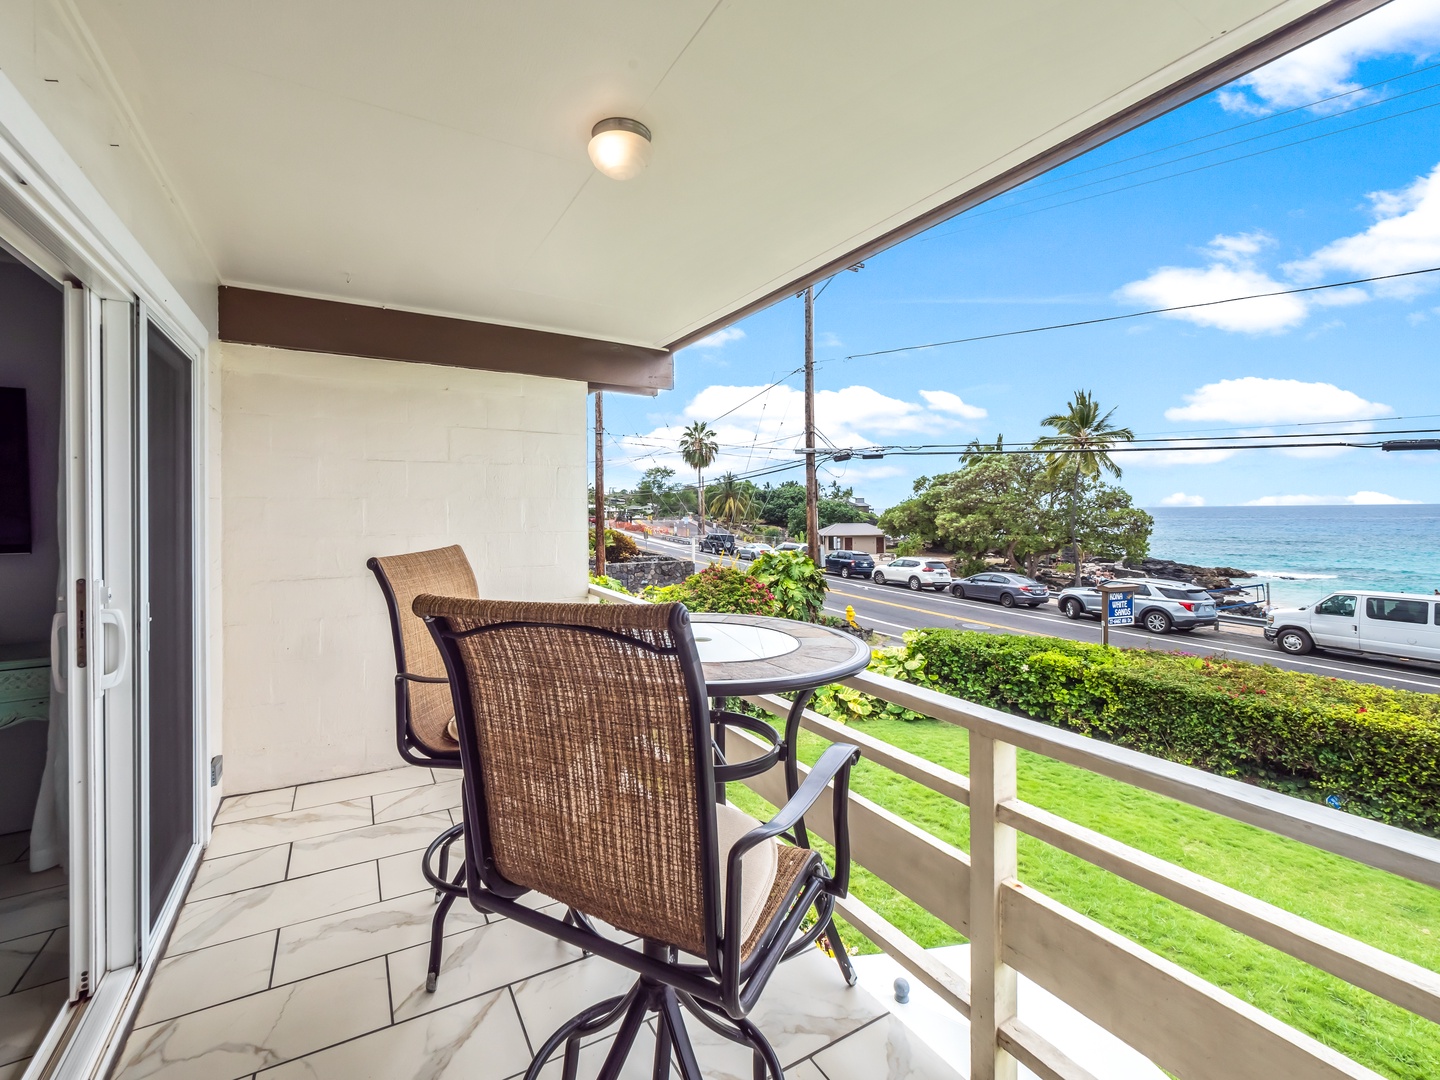 Indulge in the ocean view from the secluded lanai